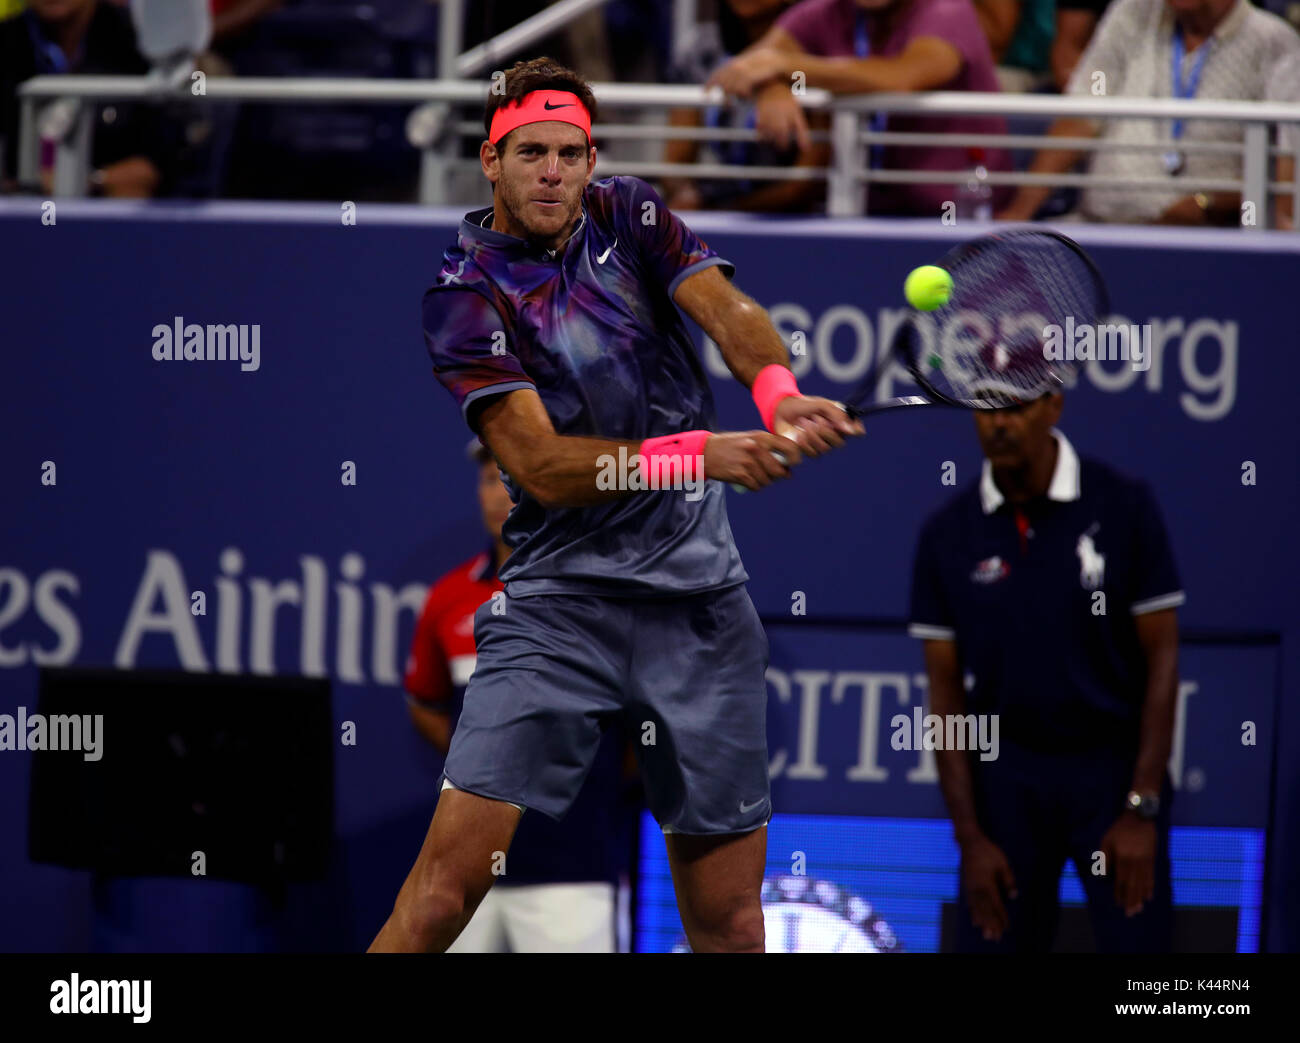 New York, United States. 04th Sep, 2017. US Open Tennis: New York, 4 September, 2017 - Juan Martin del Potro strikes a backhand to number 6 seeded Dominic Thiem of Austria in fourth round match at the US Open in Flushing Meadows, New York. del Potro won the match in five sets to advance to the quarterfinals. Credit: Adam Stoltman/Alamy Live News Stock Photo